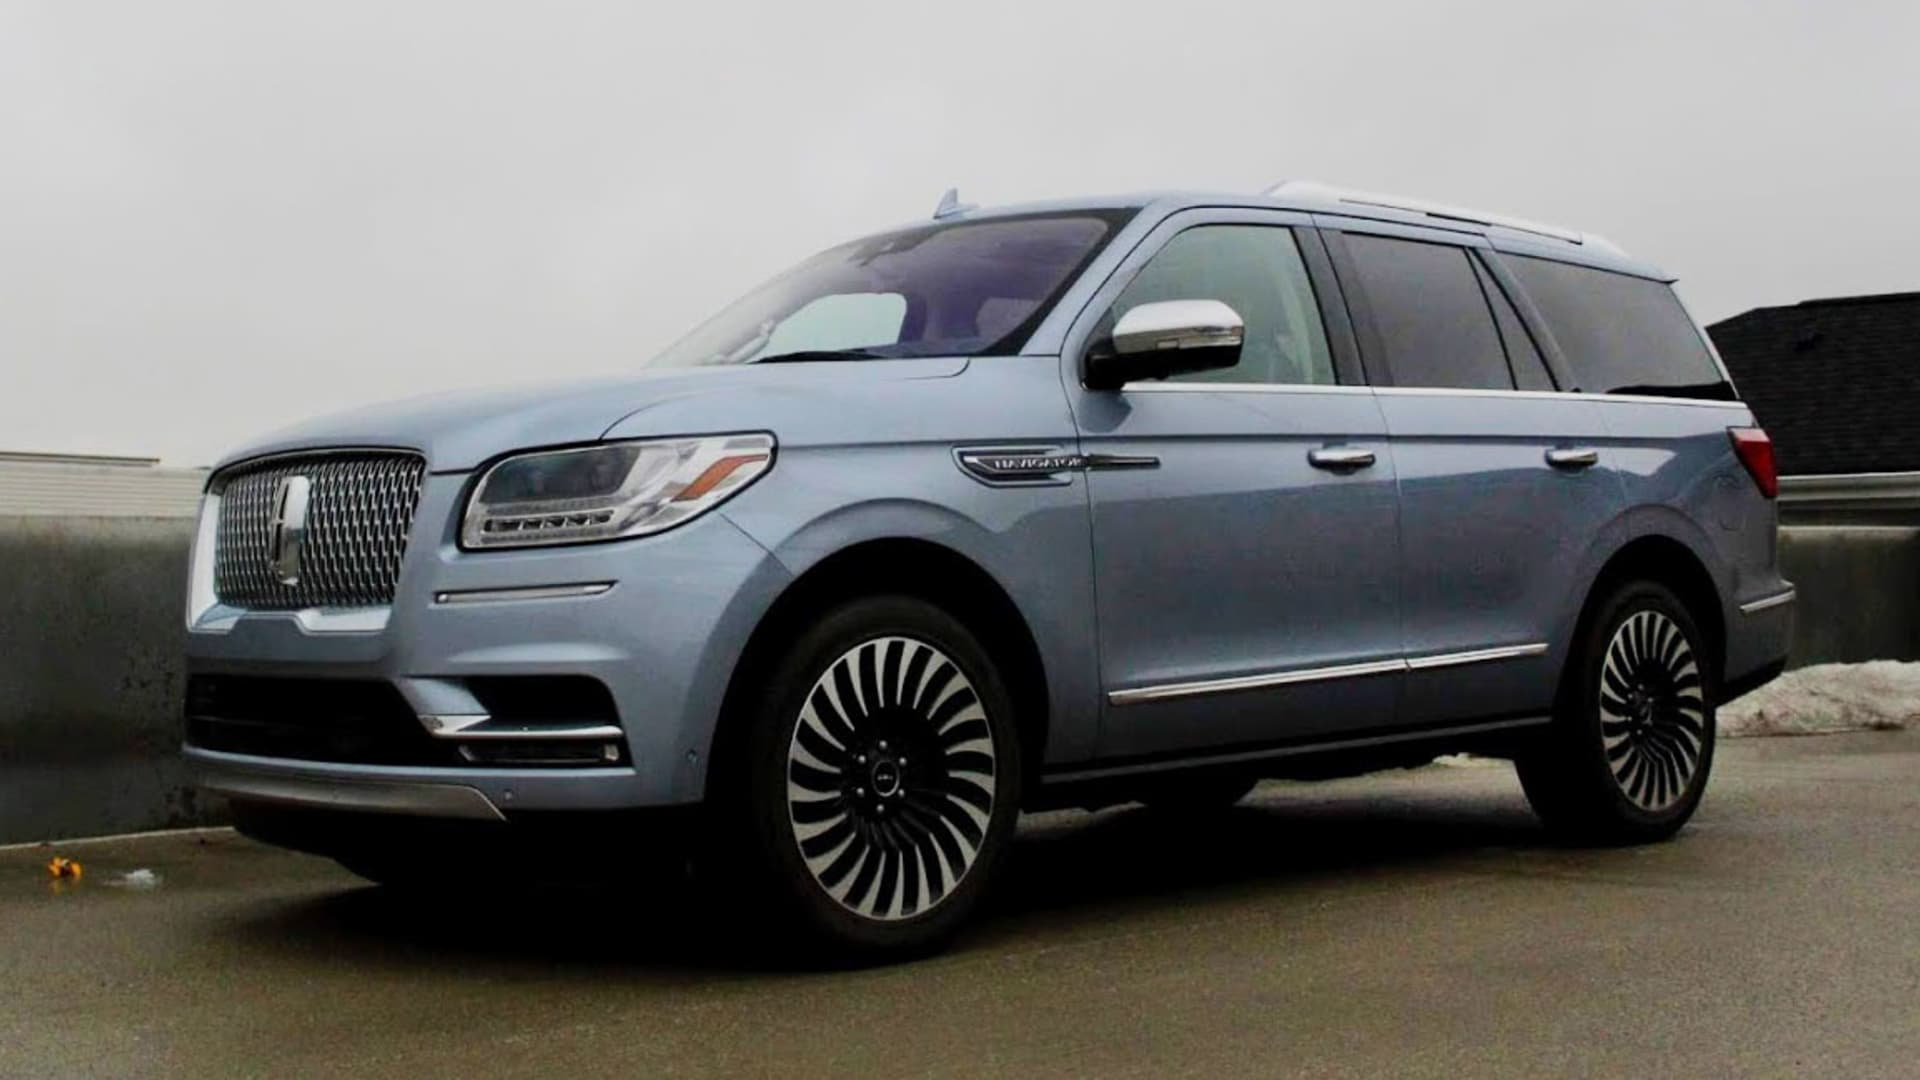 Review: The 2019 Lincoln Navigator Black Label returns to luxury roots